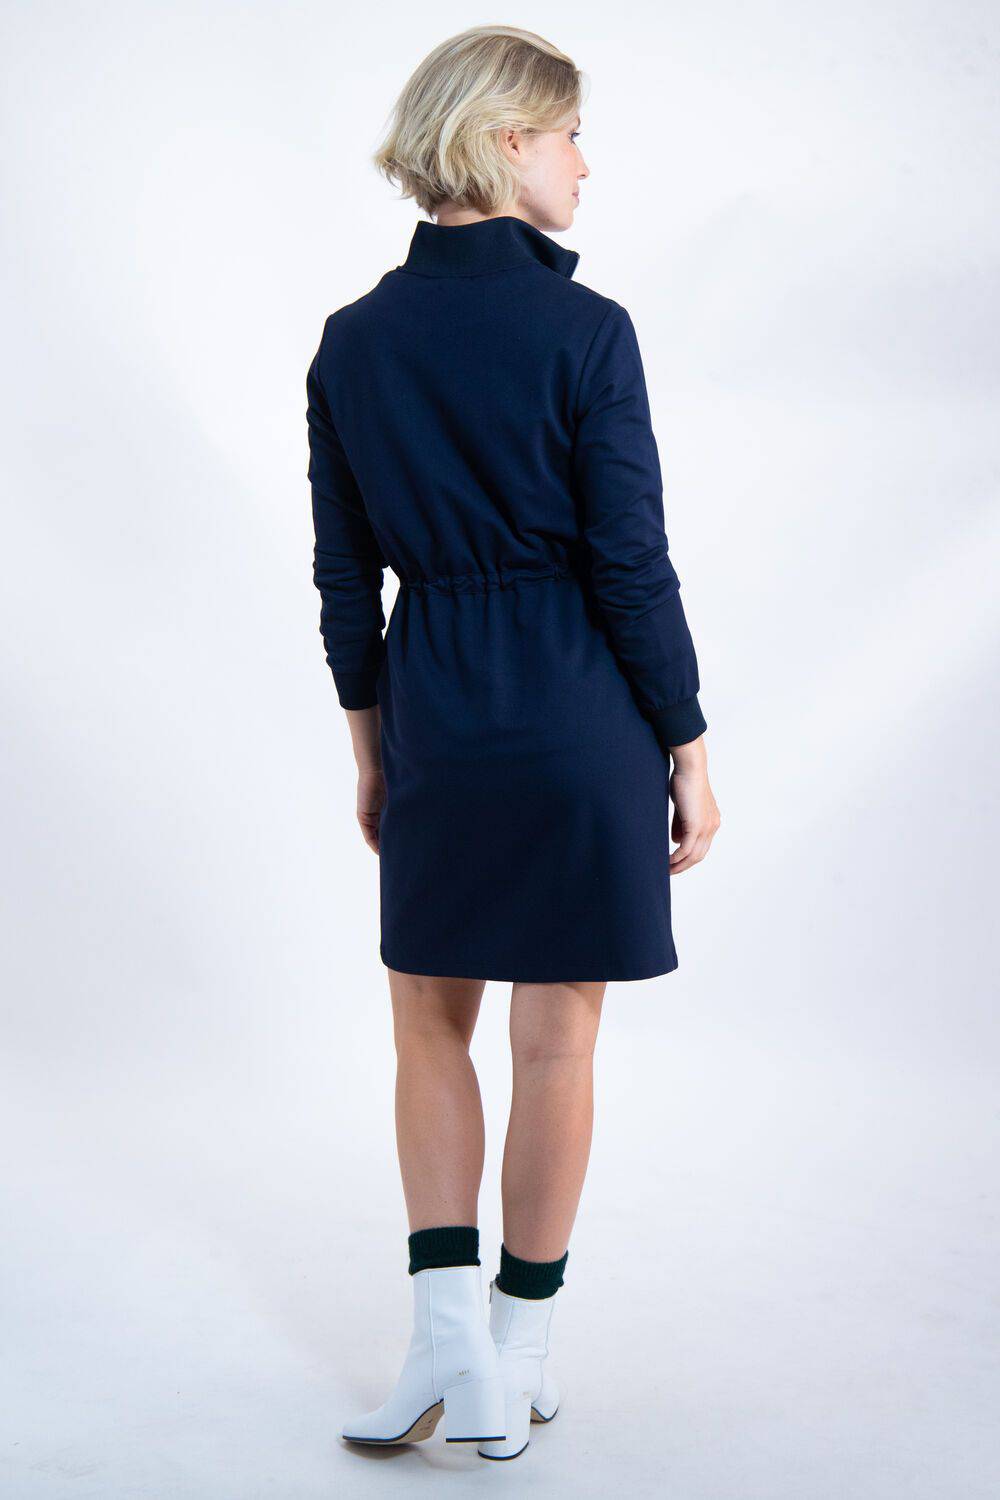 Dark Blue Garcia Dress - Your Style Your Story